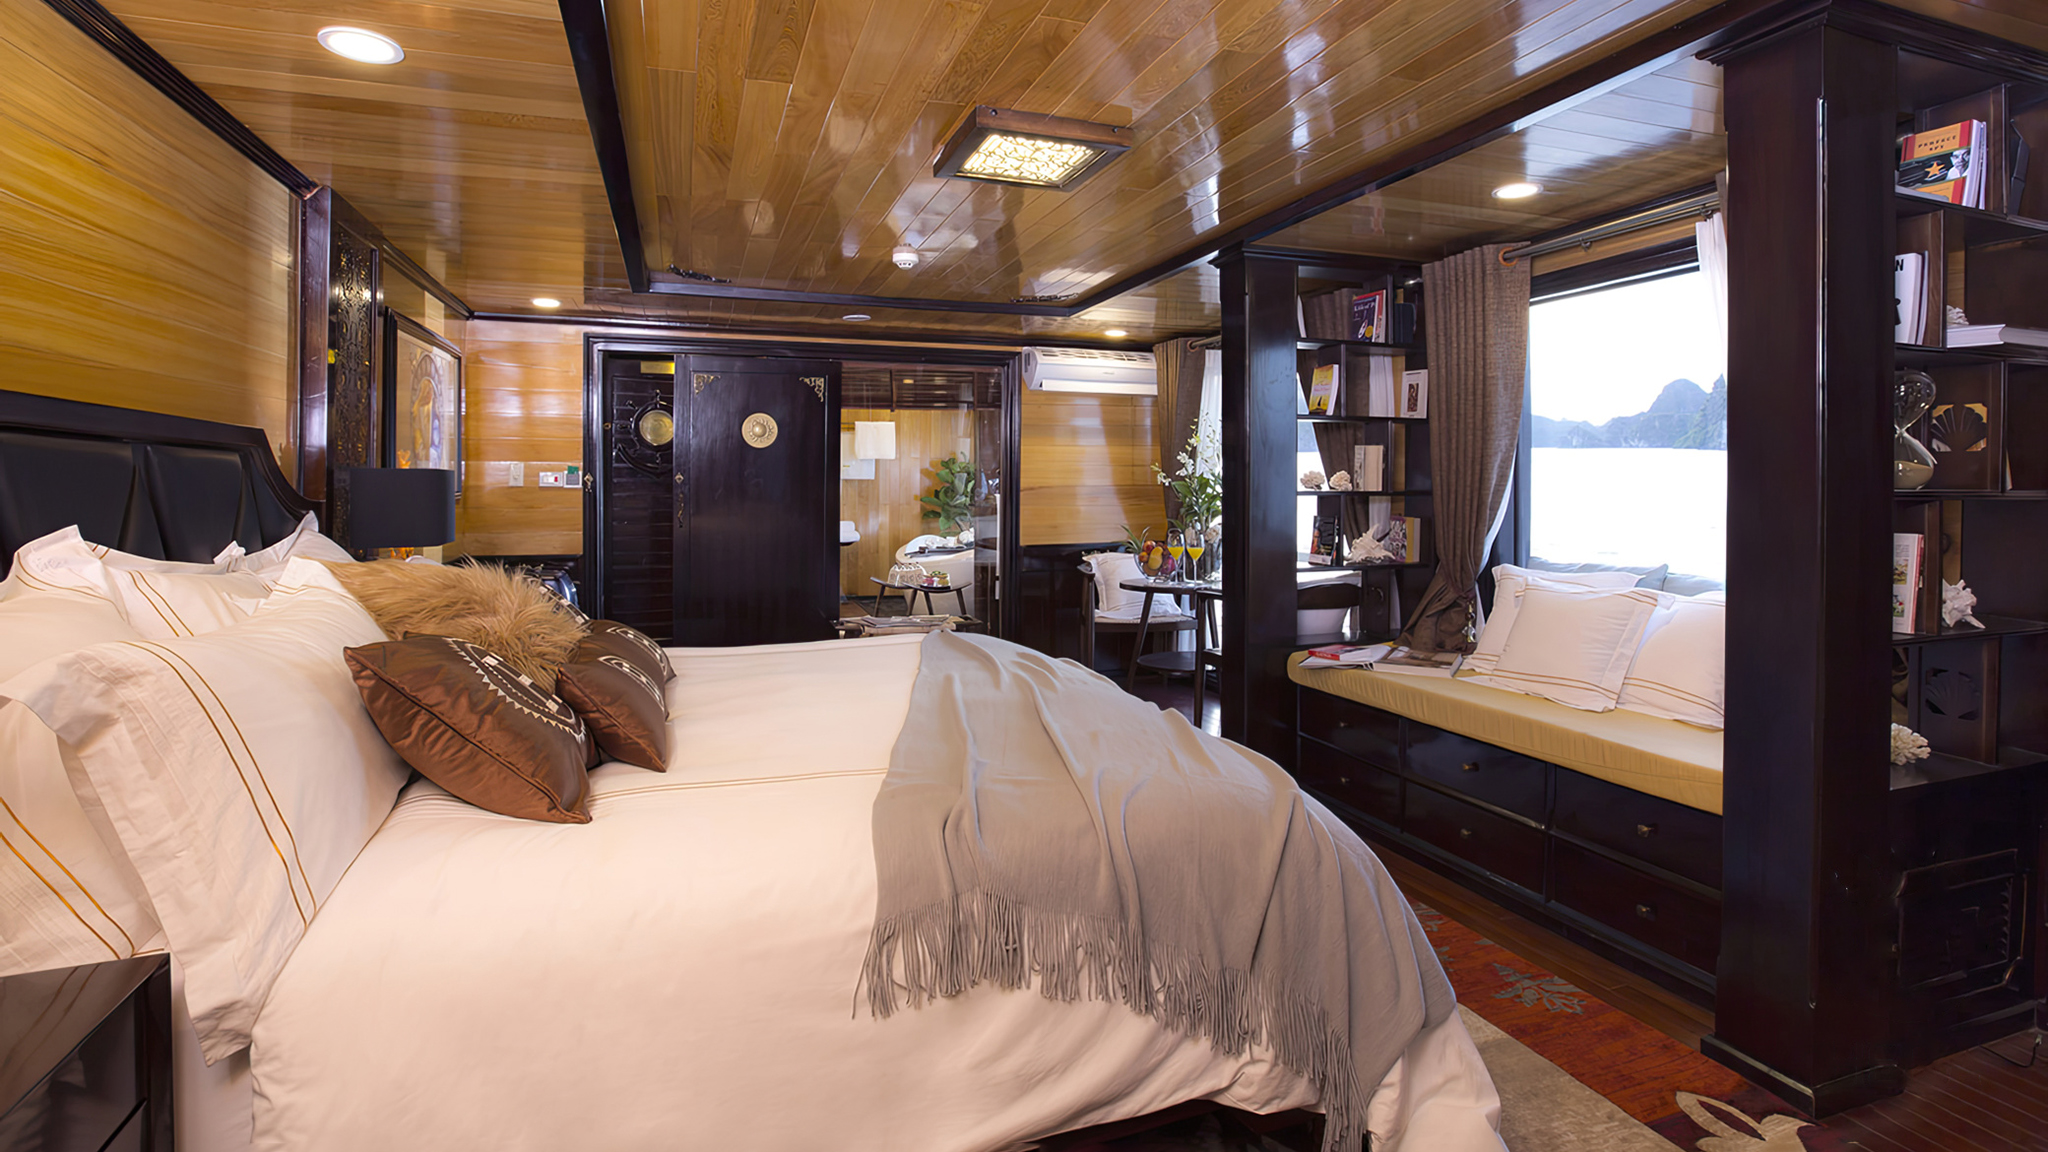 The most luxury suite on Hera Cruise